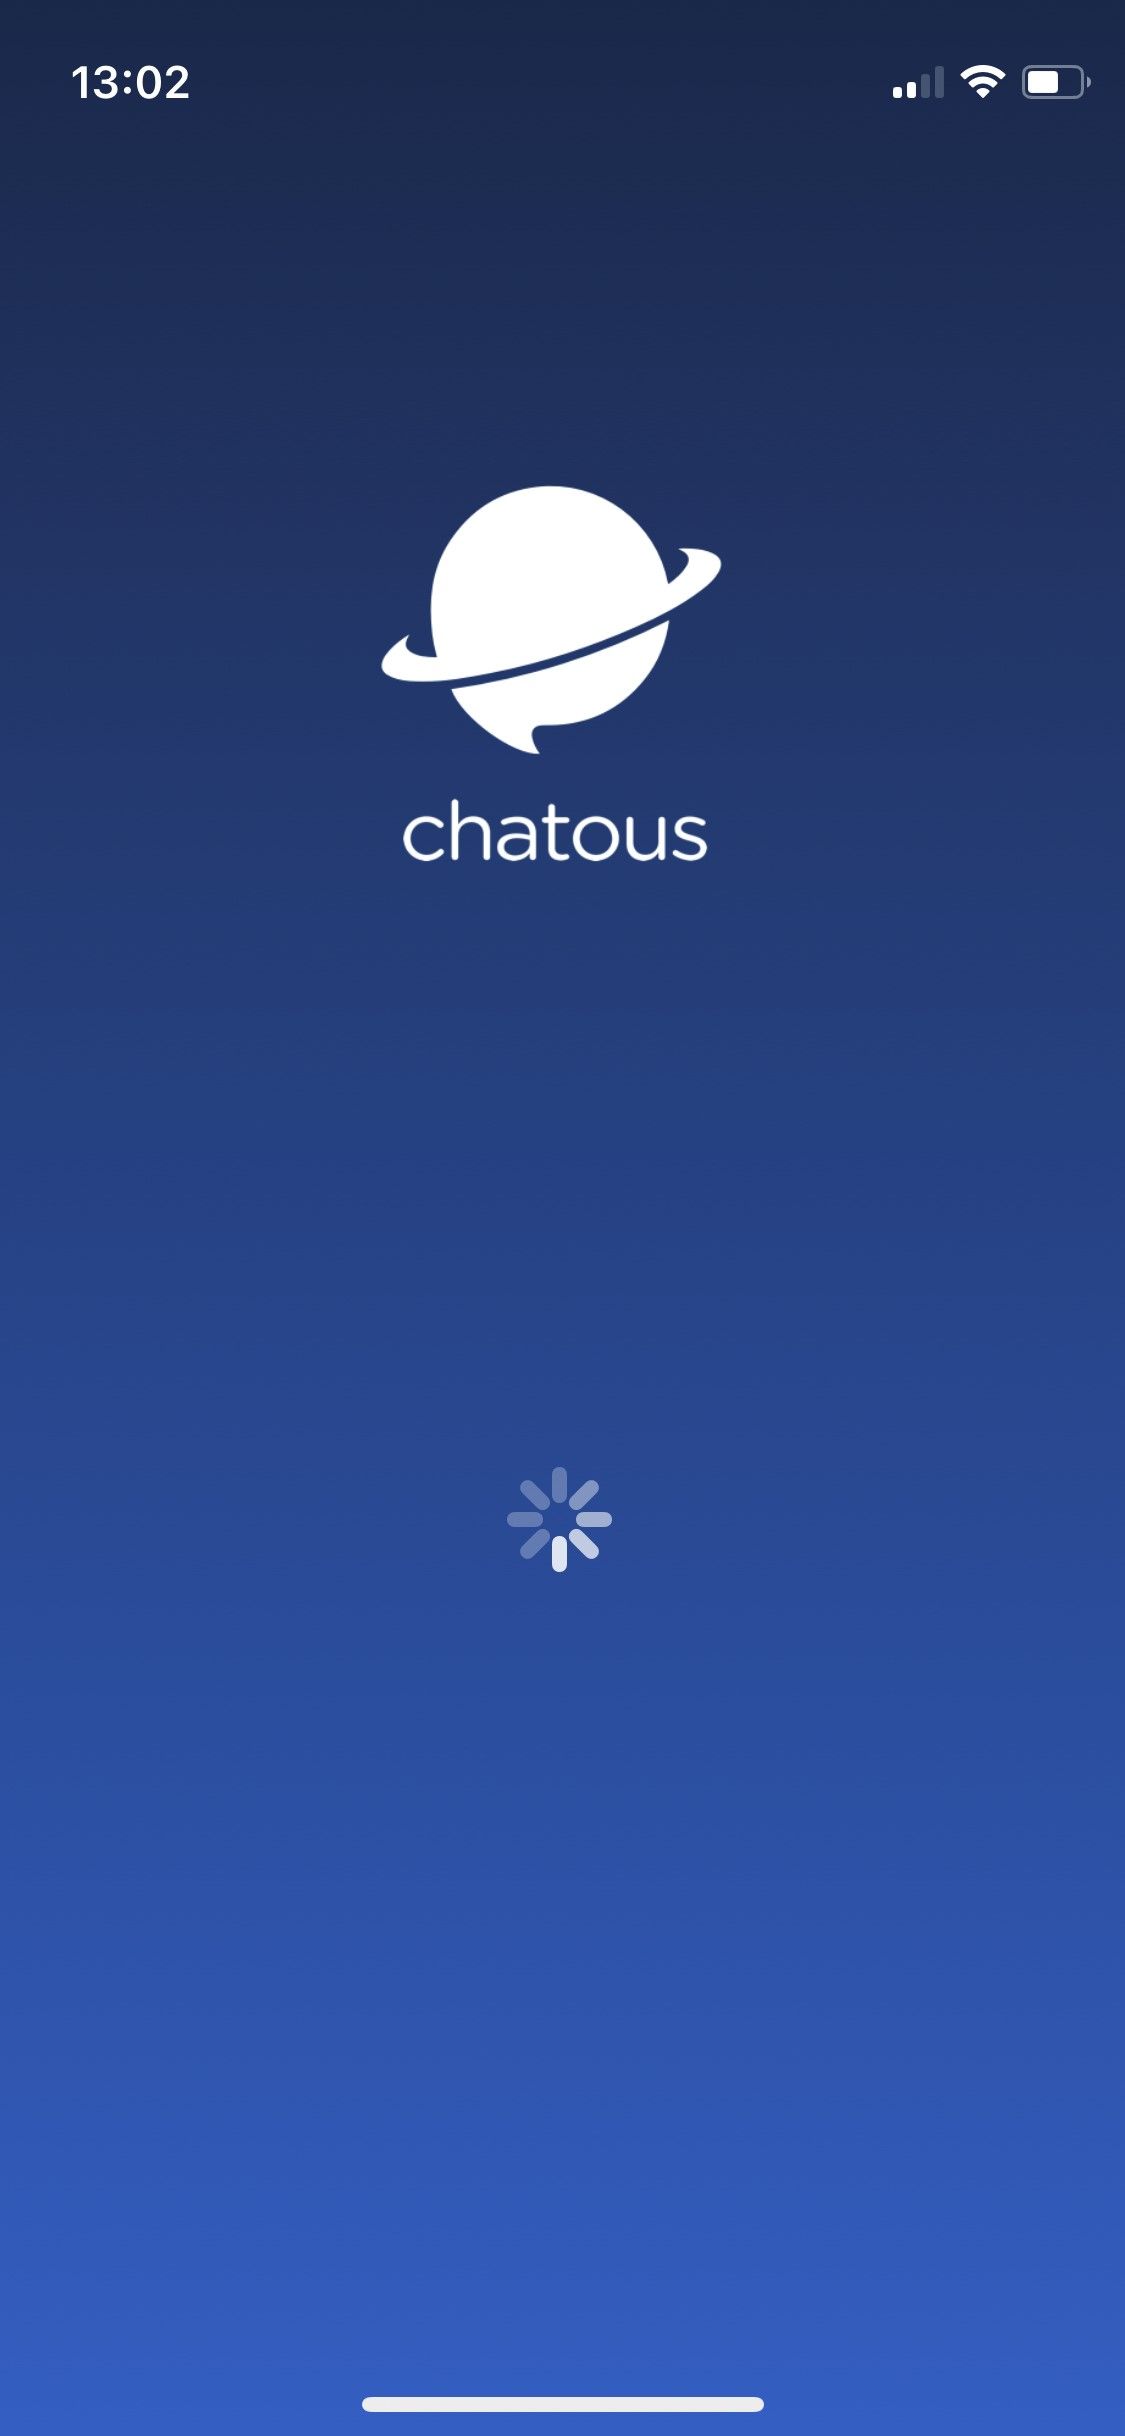 Chatous app for feeling lonely